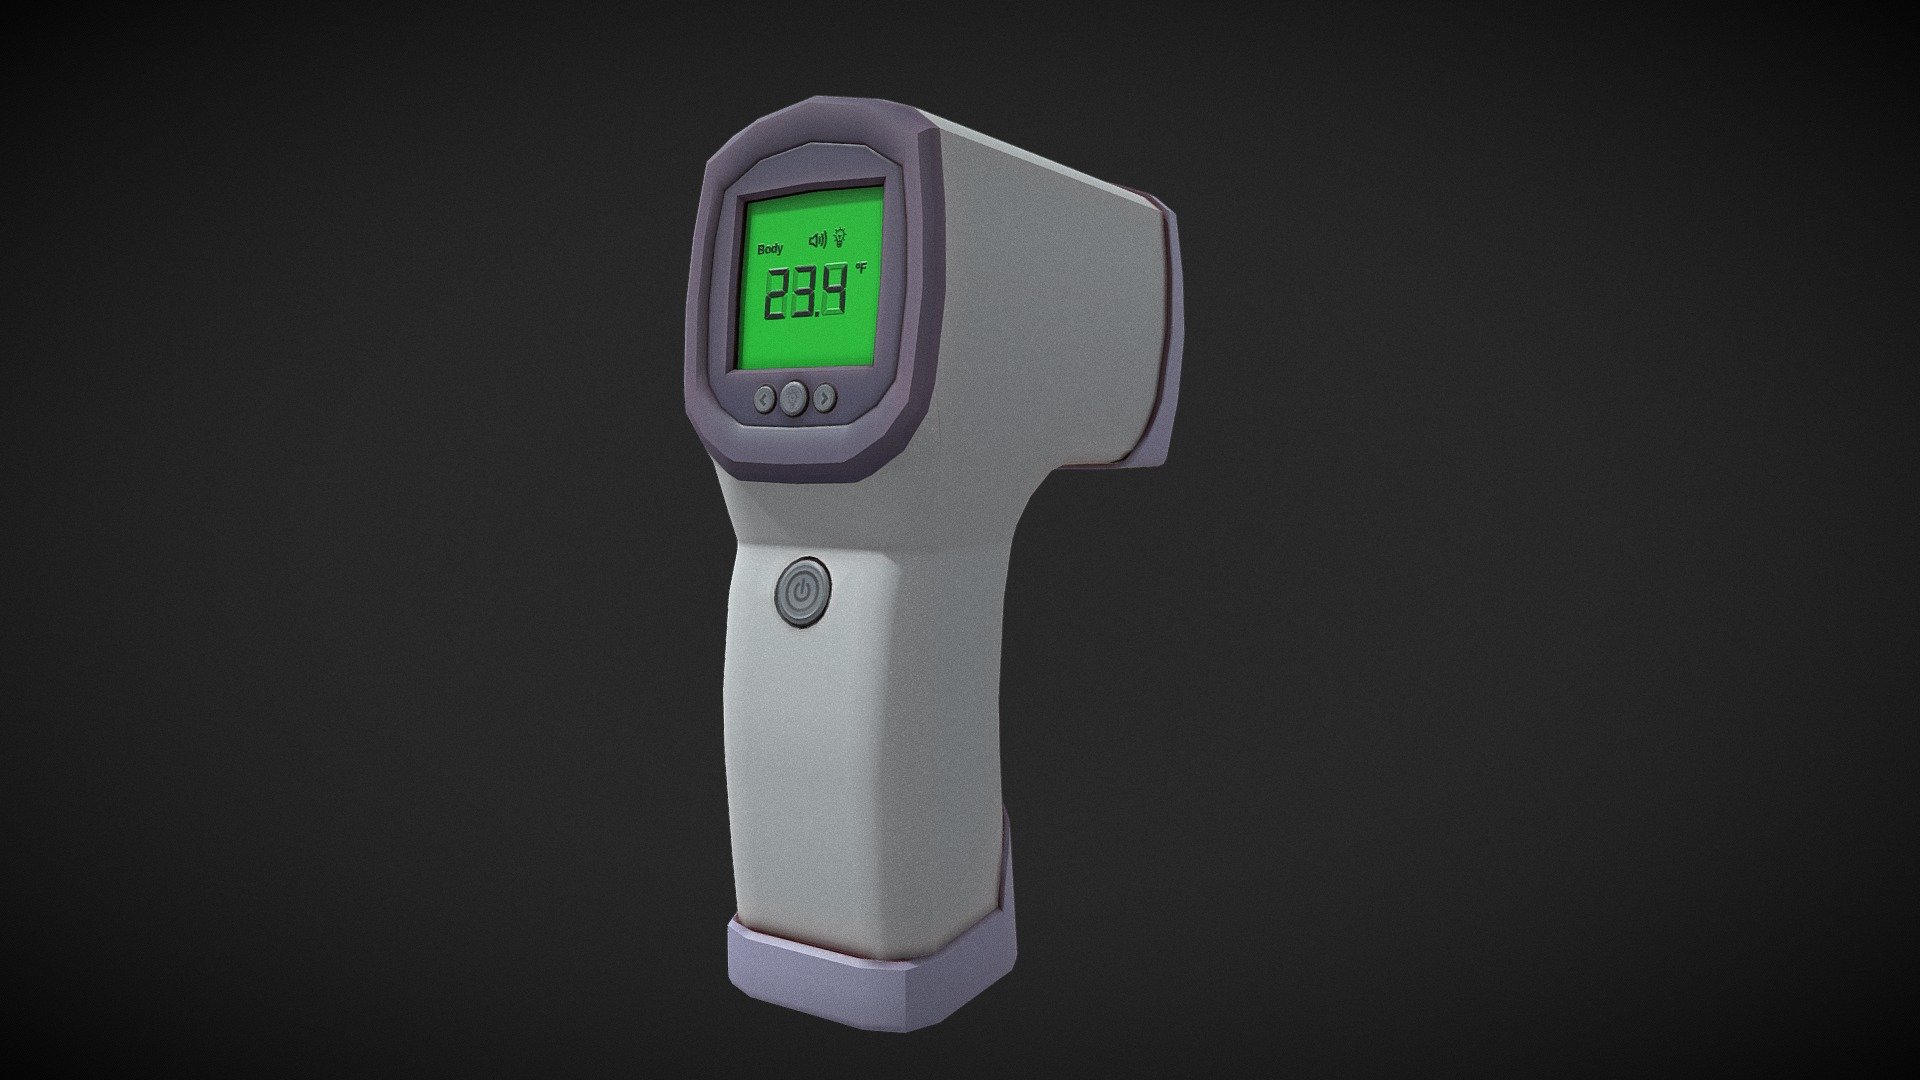 If you need help with this model or have any questions, feel free to contact me. I will be happy to help you.

Contact:

Instagram: @MurallaMuerta

Artstation: SebastianBA

Email: sebastian96ba@gmail.com - Forehead Thermometer - Buy Royalty Free 3D model by Sebastian.BA 3d model